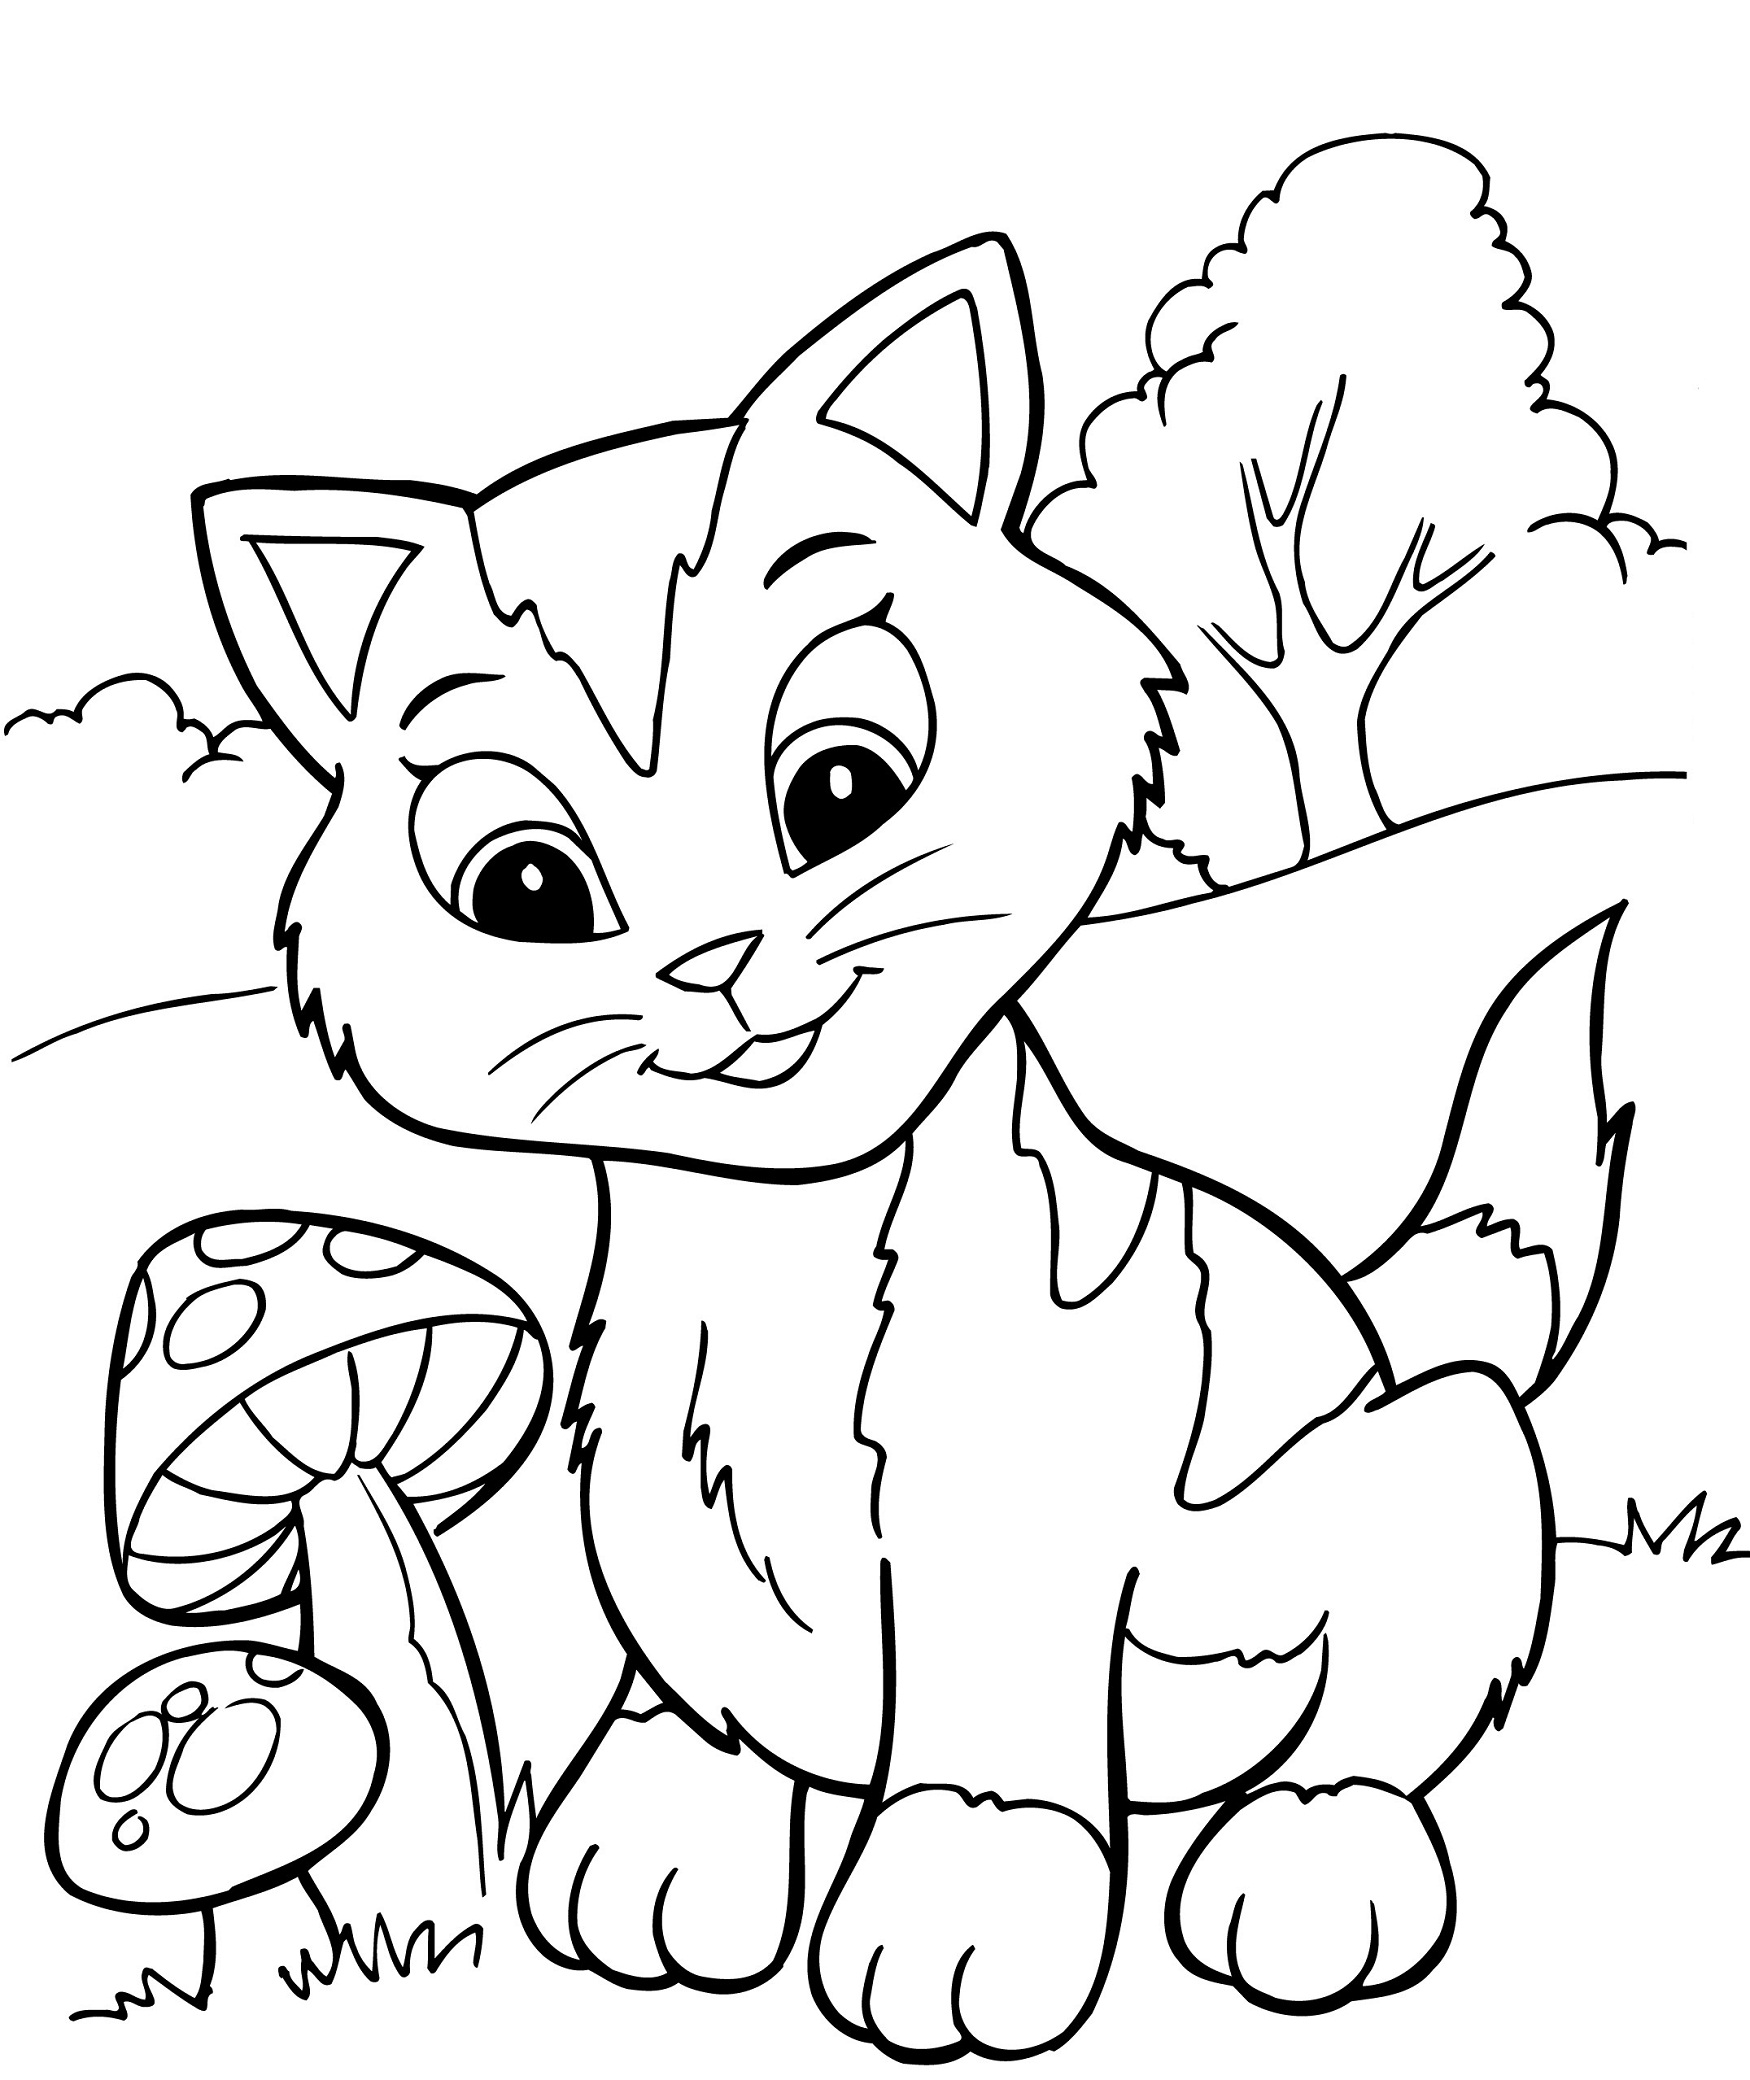 cat coloring page coloring pages cats and kittens coloring pages free and cat coloring page 